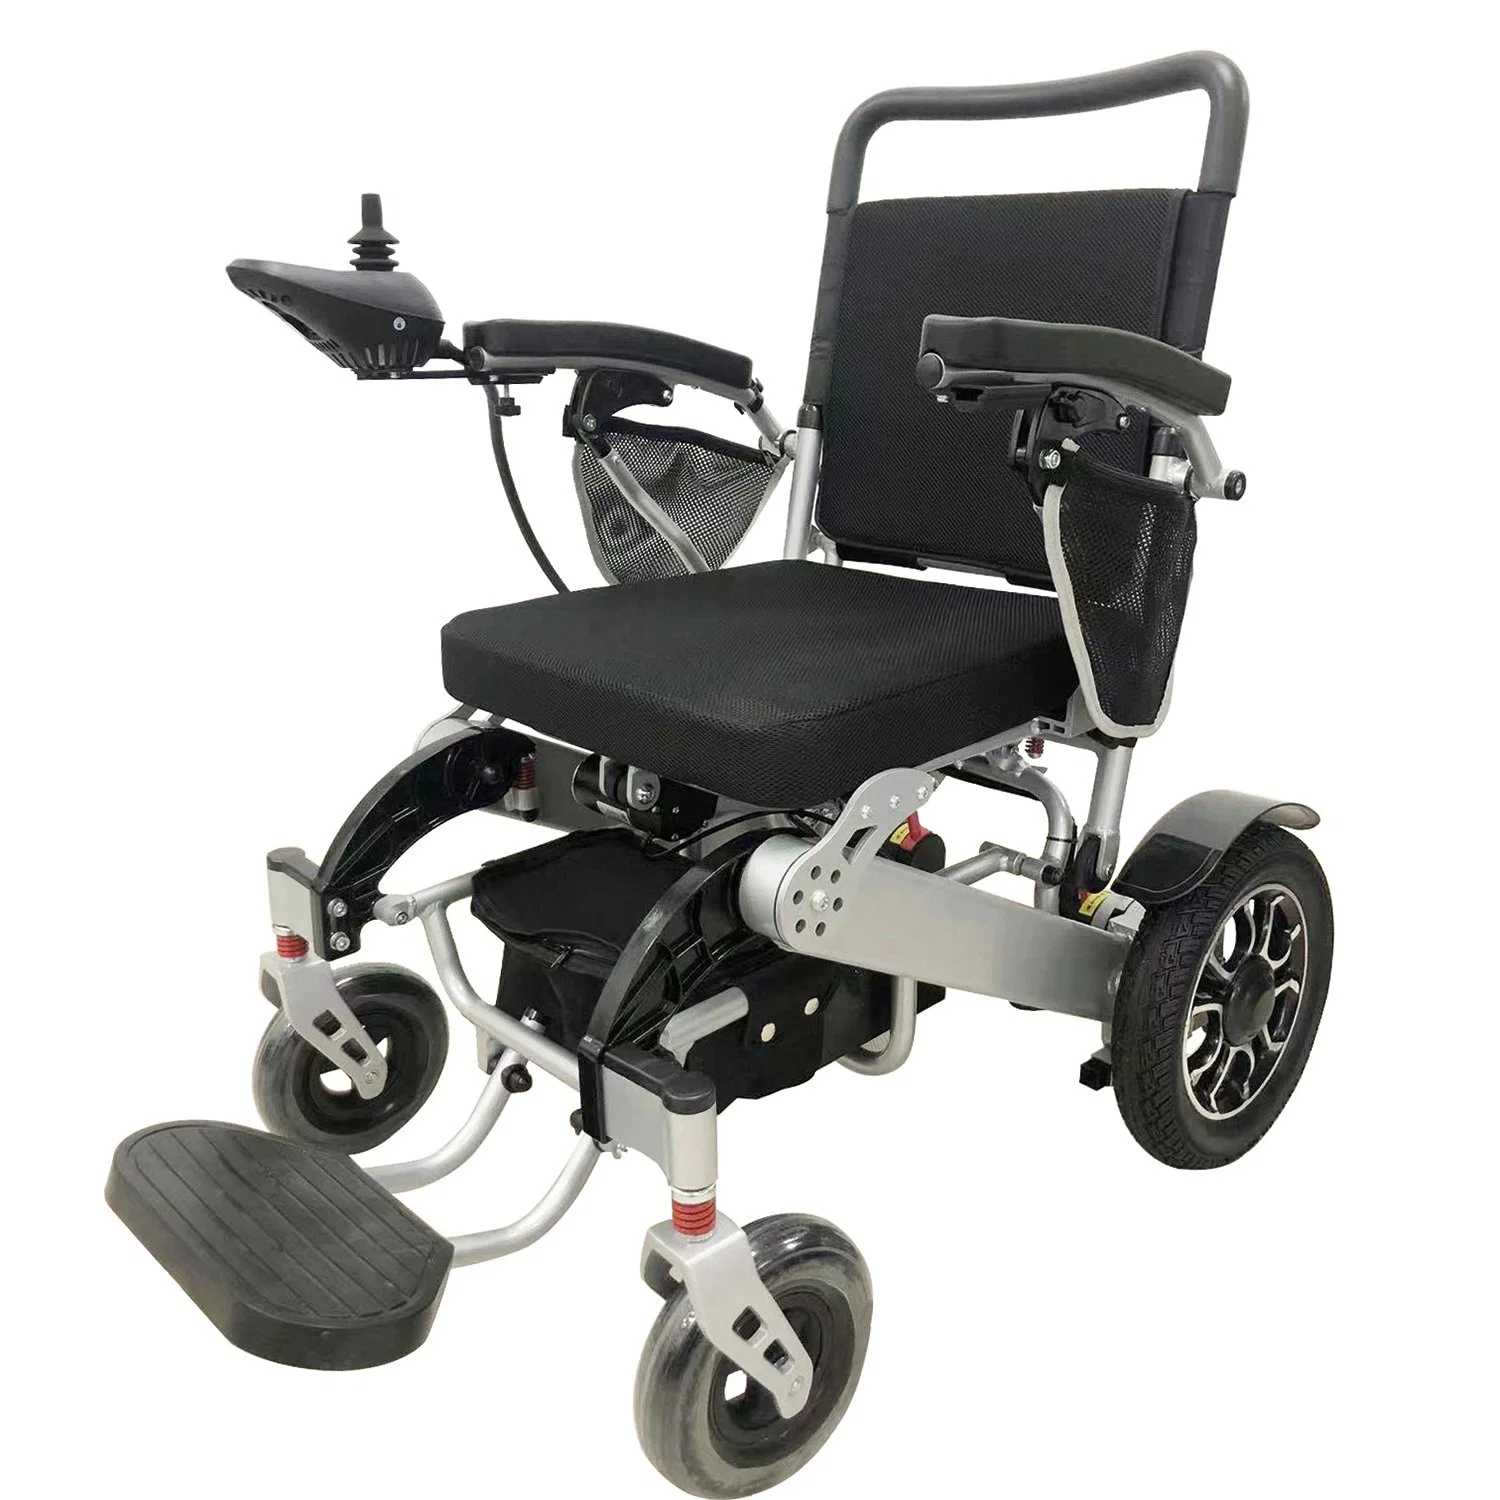 Ksm-605 Auto Open and Fold Lightweight Power Electric Wheelchair Manufacturer for Elderly Folding Electric Wheelchairs for Sale